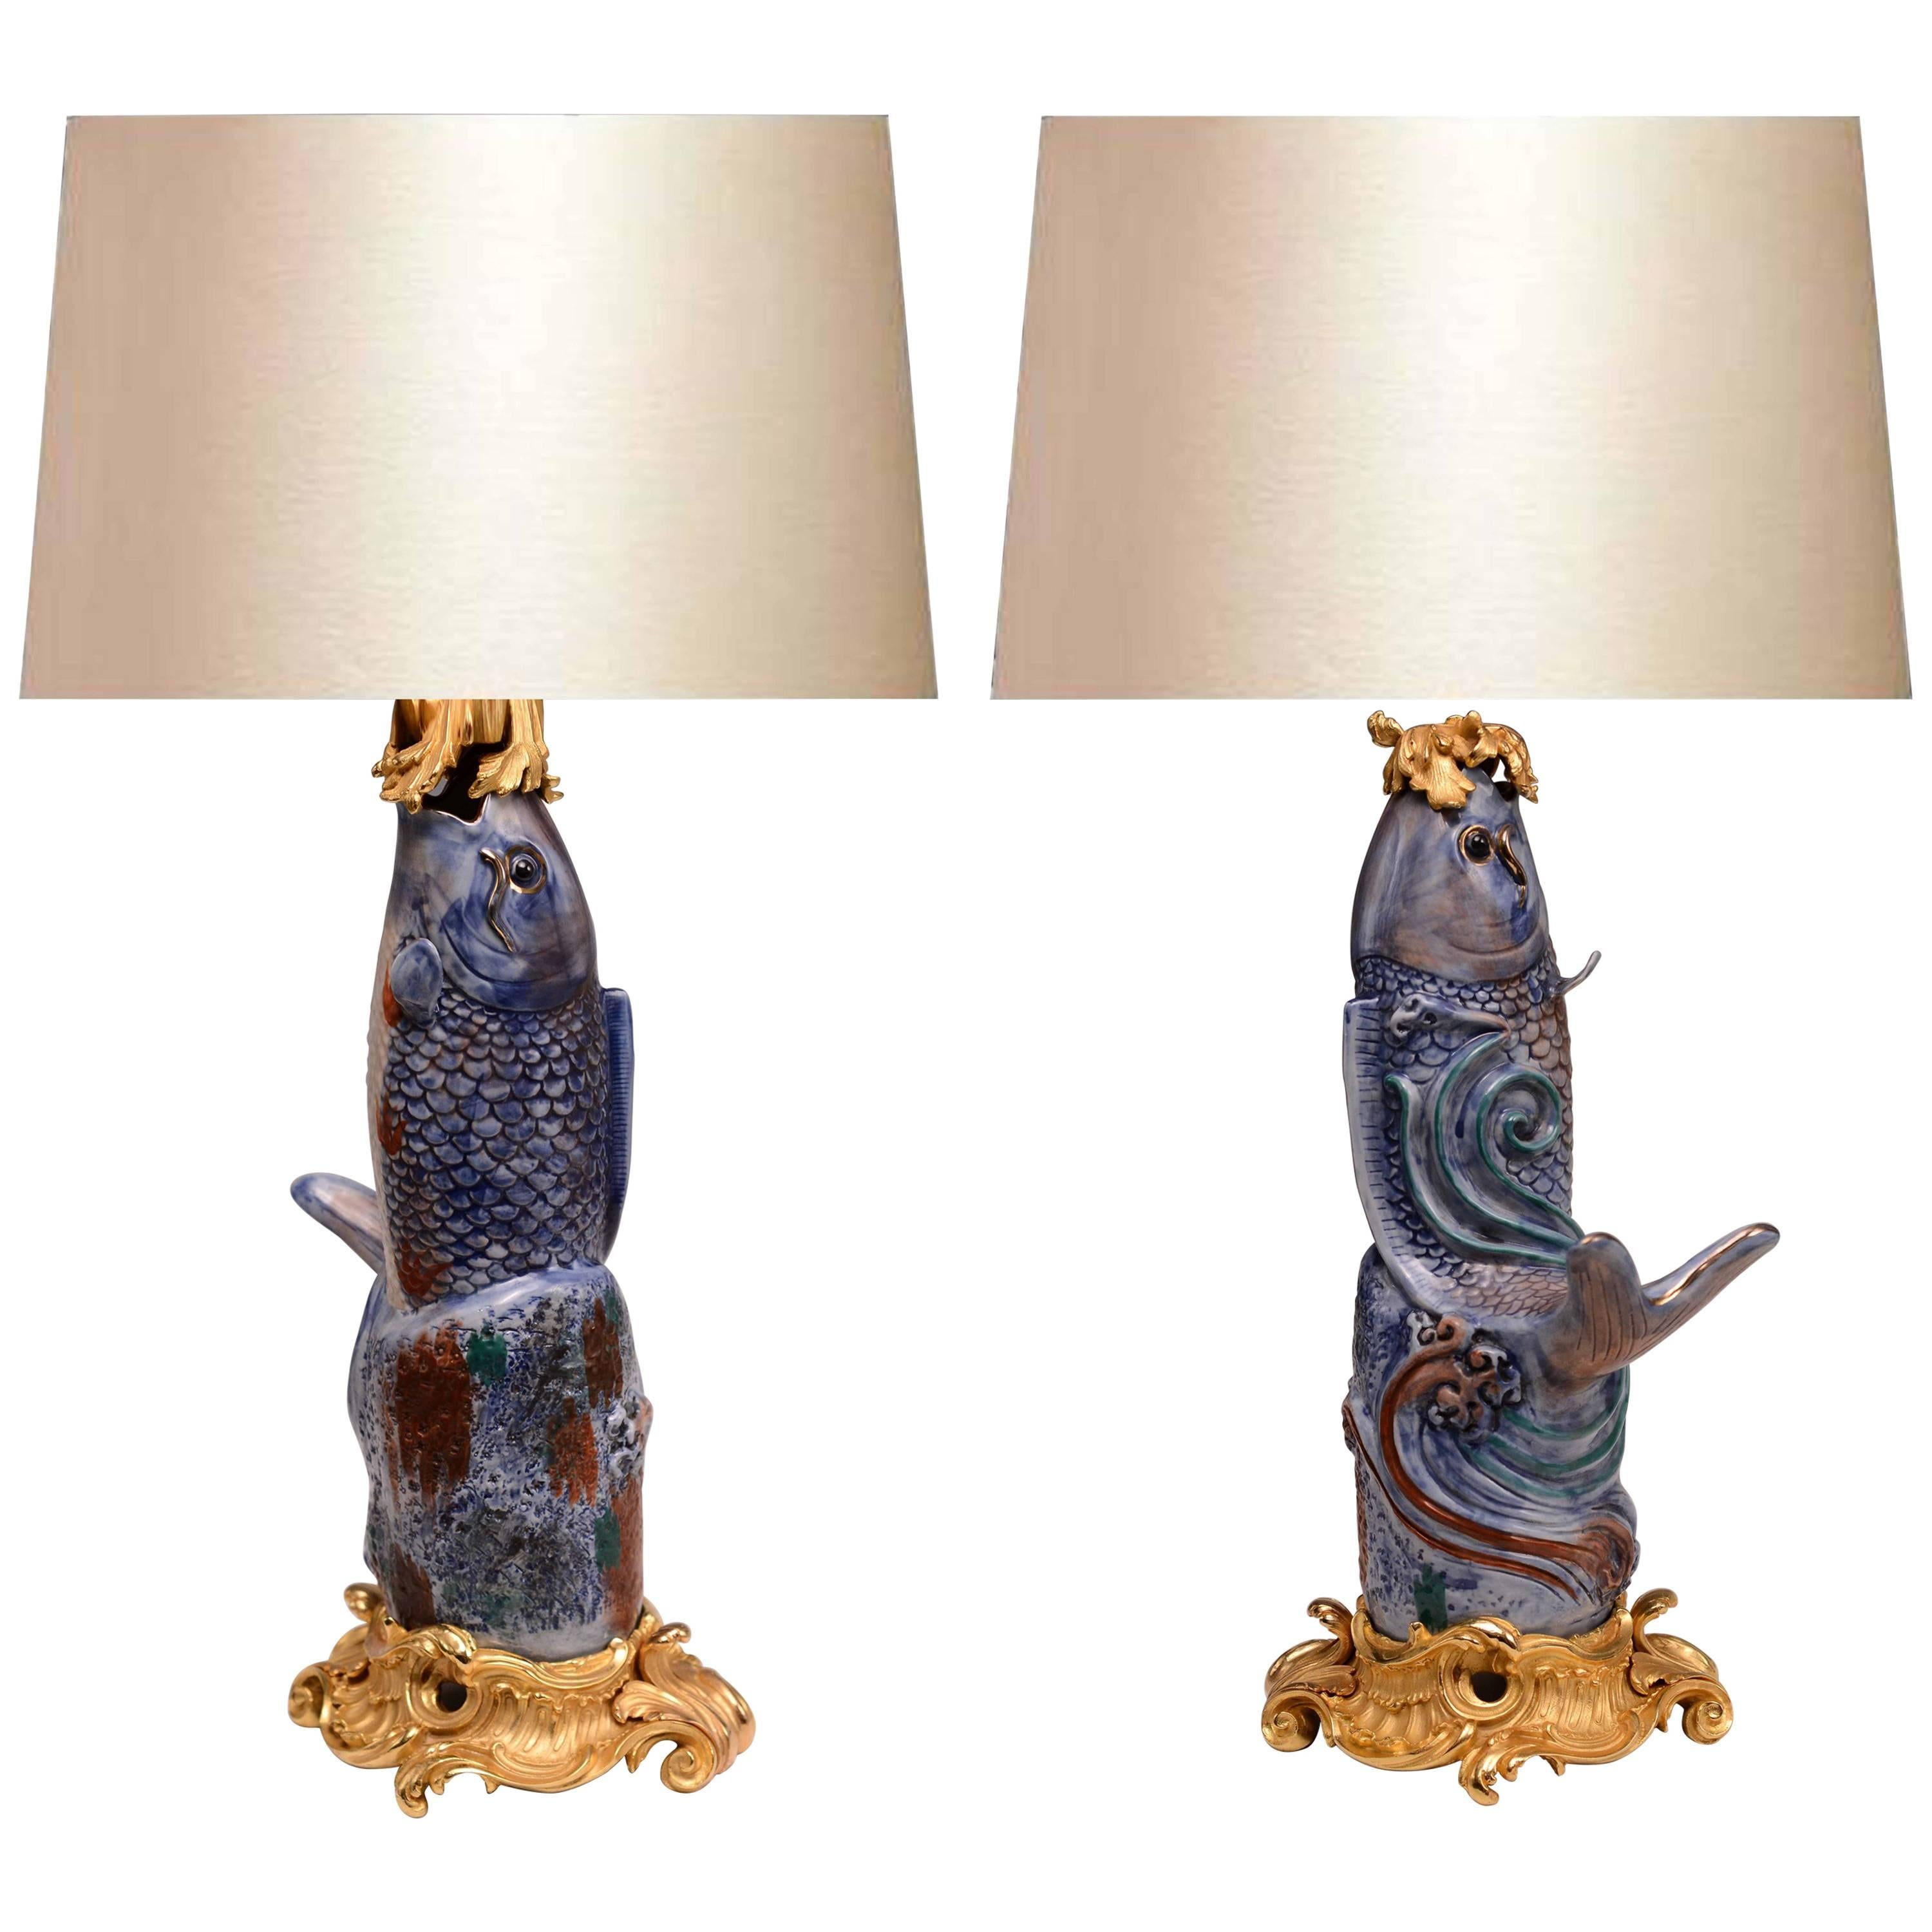 Pair of Ormolu Mount Porcelain Figure of Fish Lamps For Sale